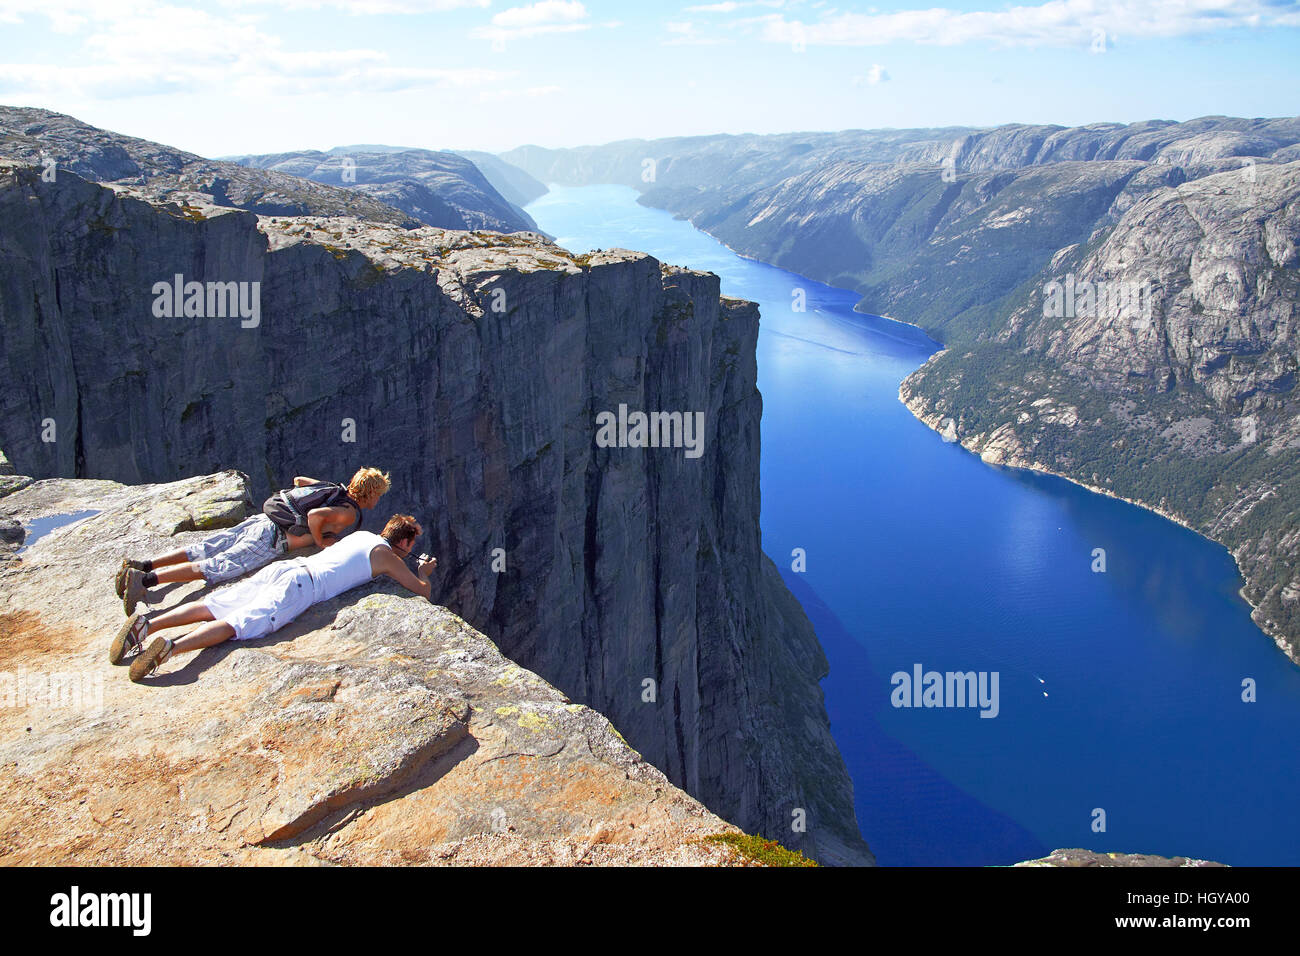 KJERAGBOLTEN, NORWAY - JUNE 23, 2015: tourists are on the edge of the cliff and photograph the majestic fjord in Kjeragbolten  mountains,  Norway Stock Photo